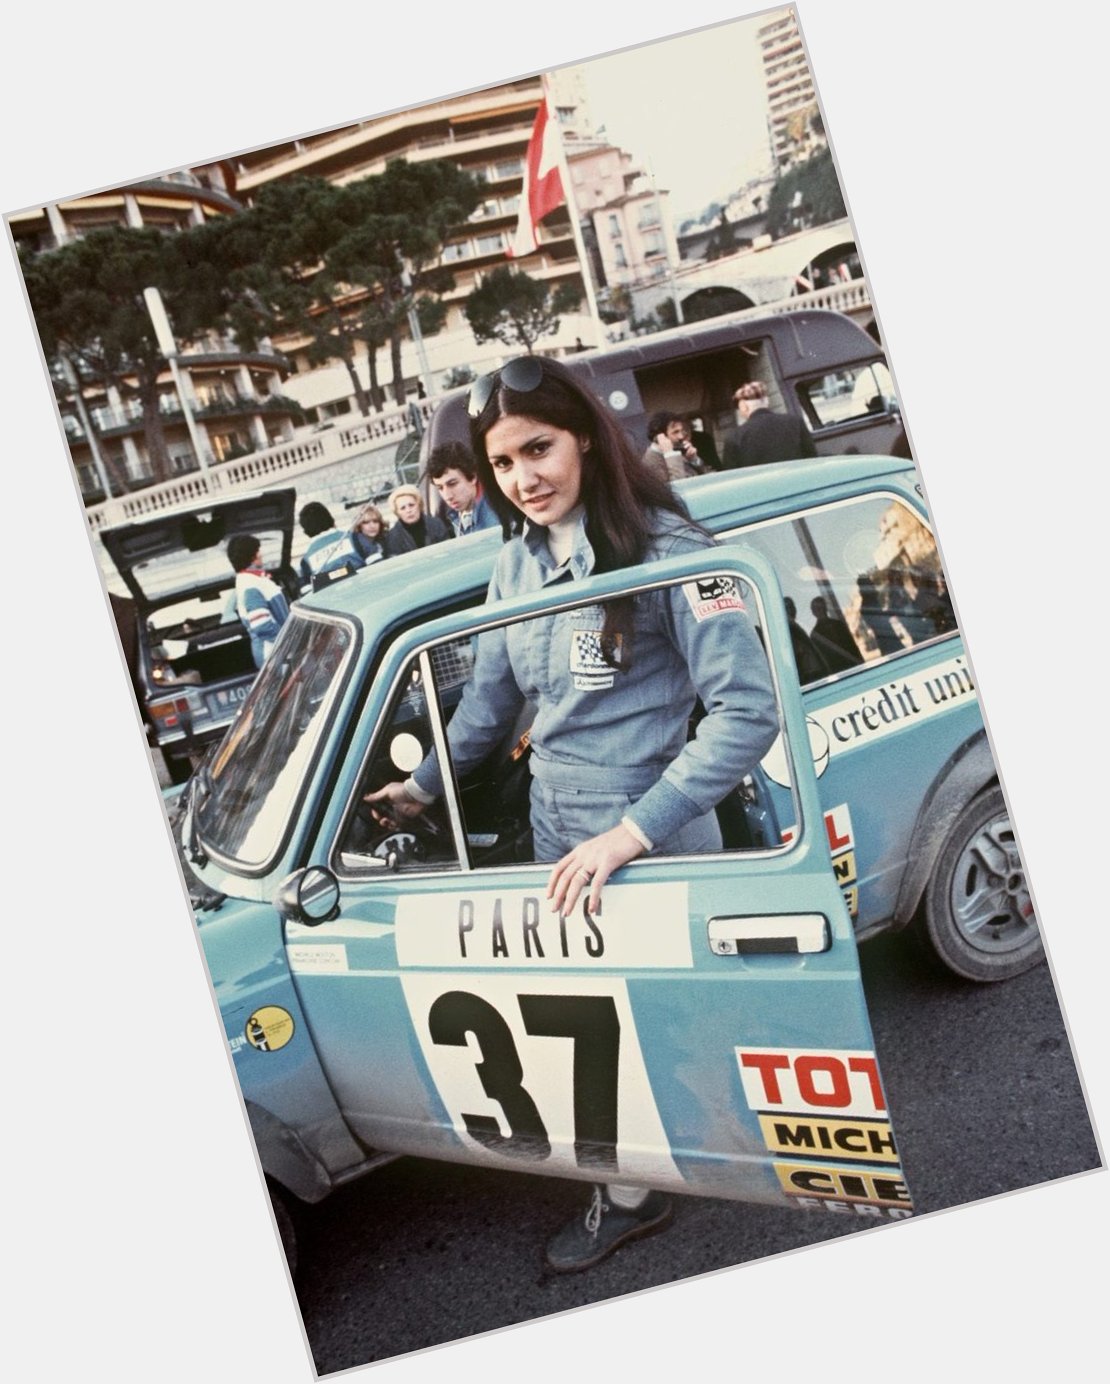 Before the day ends,
happy birthday Michele Mouton 